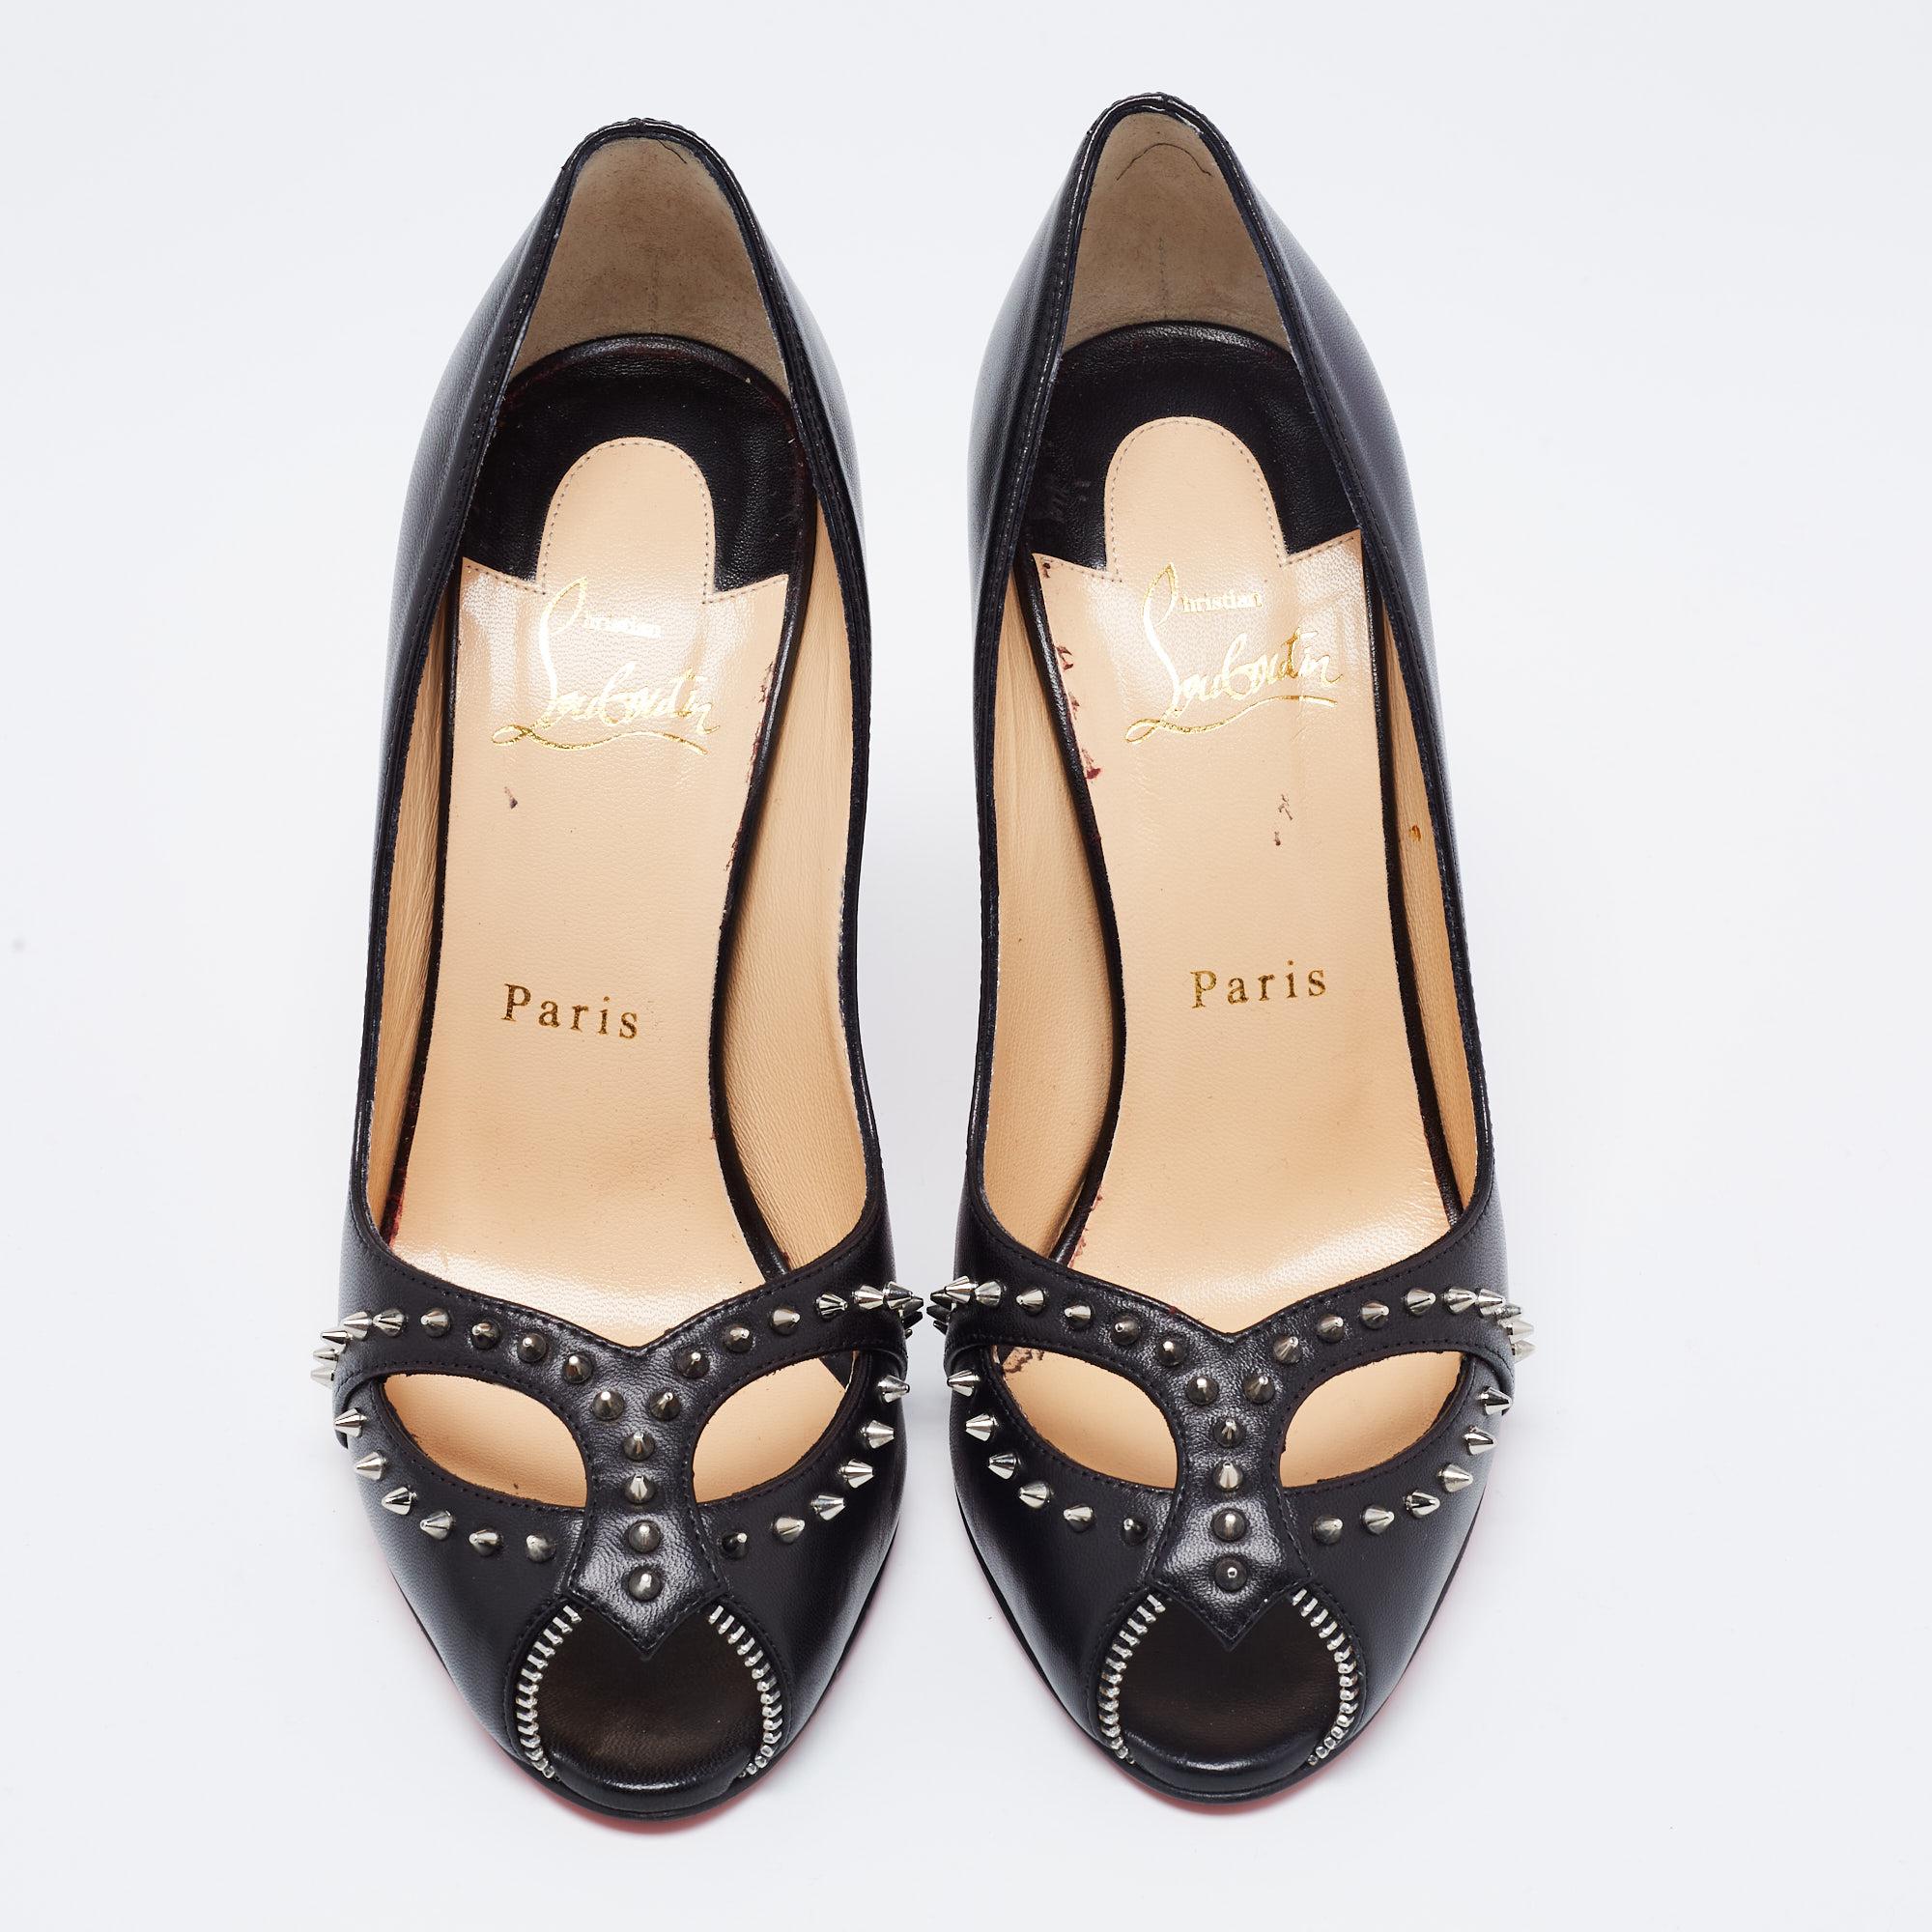 Think of statement shoes, and Christian Louboutin is one of the first names that comes to our minds. These exquisite pumps from the Parisian label are worth splurging on. Crafted from black leather, they carry peep toes and cut-out vamps that are